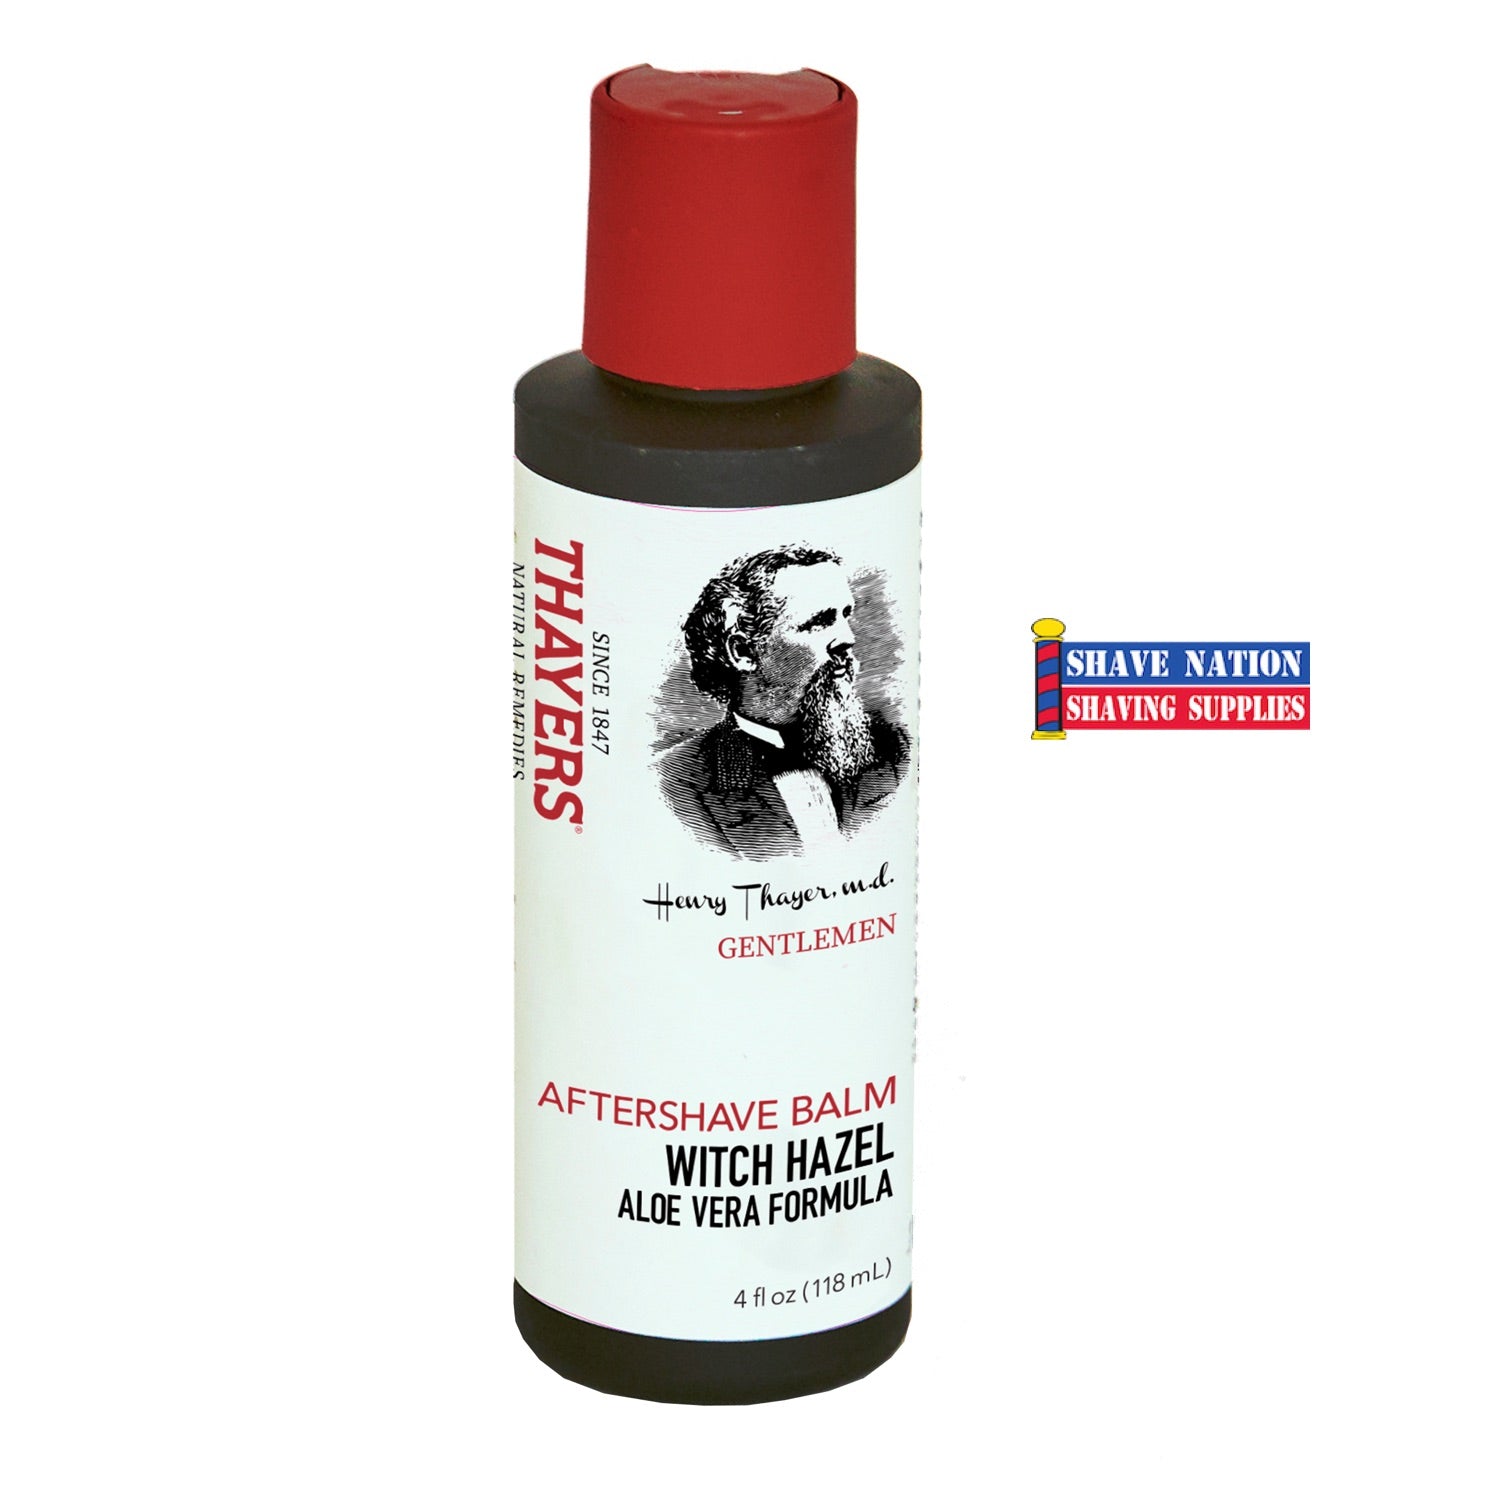 NEW! Thayers Gentlemen's Aftershave Balm